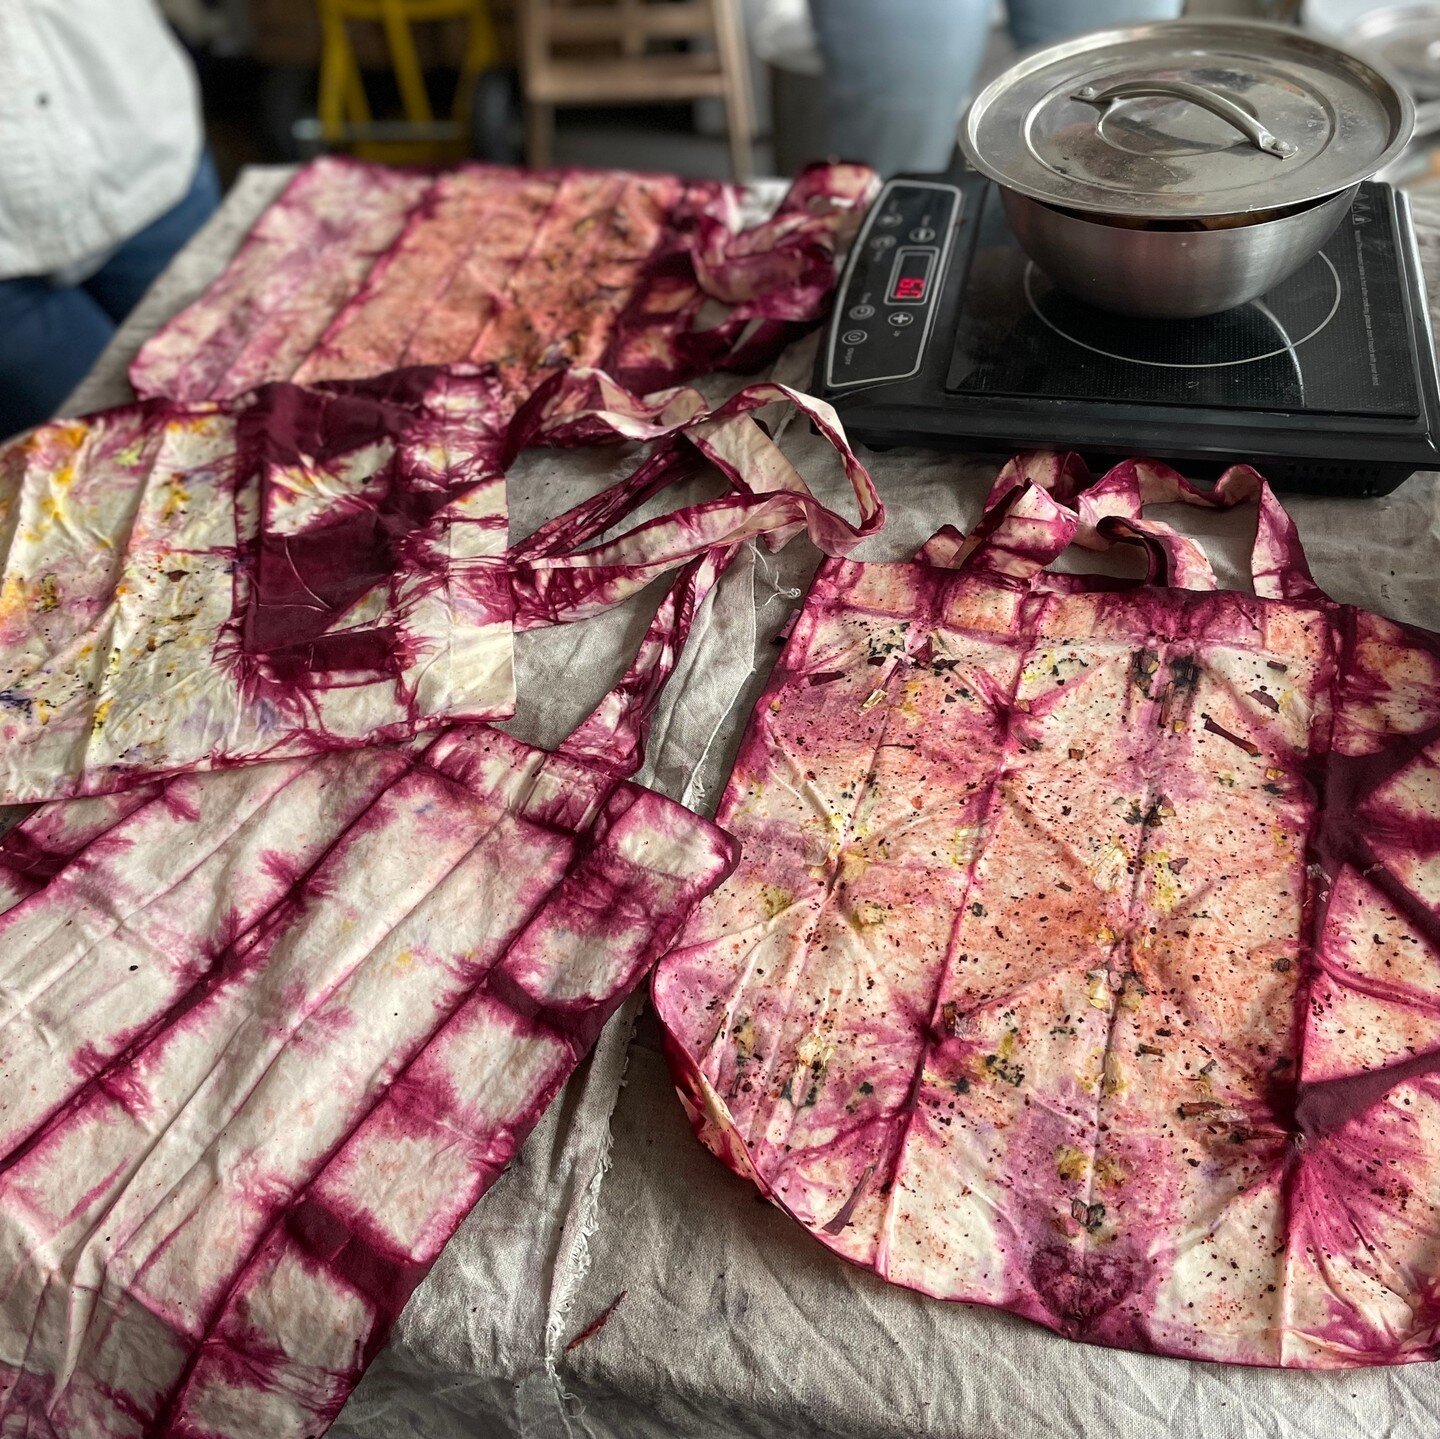 A fun creative dye workshop for @fatface design team last Summer⁠.
⁠
We bundle dyed fabrics with flowers, dyed a grid of colour swatches and shibori tie dyed with pink lac to make uniquely textured tote bags.
⁠
I love offering private workshops and t